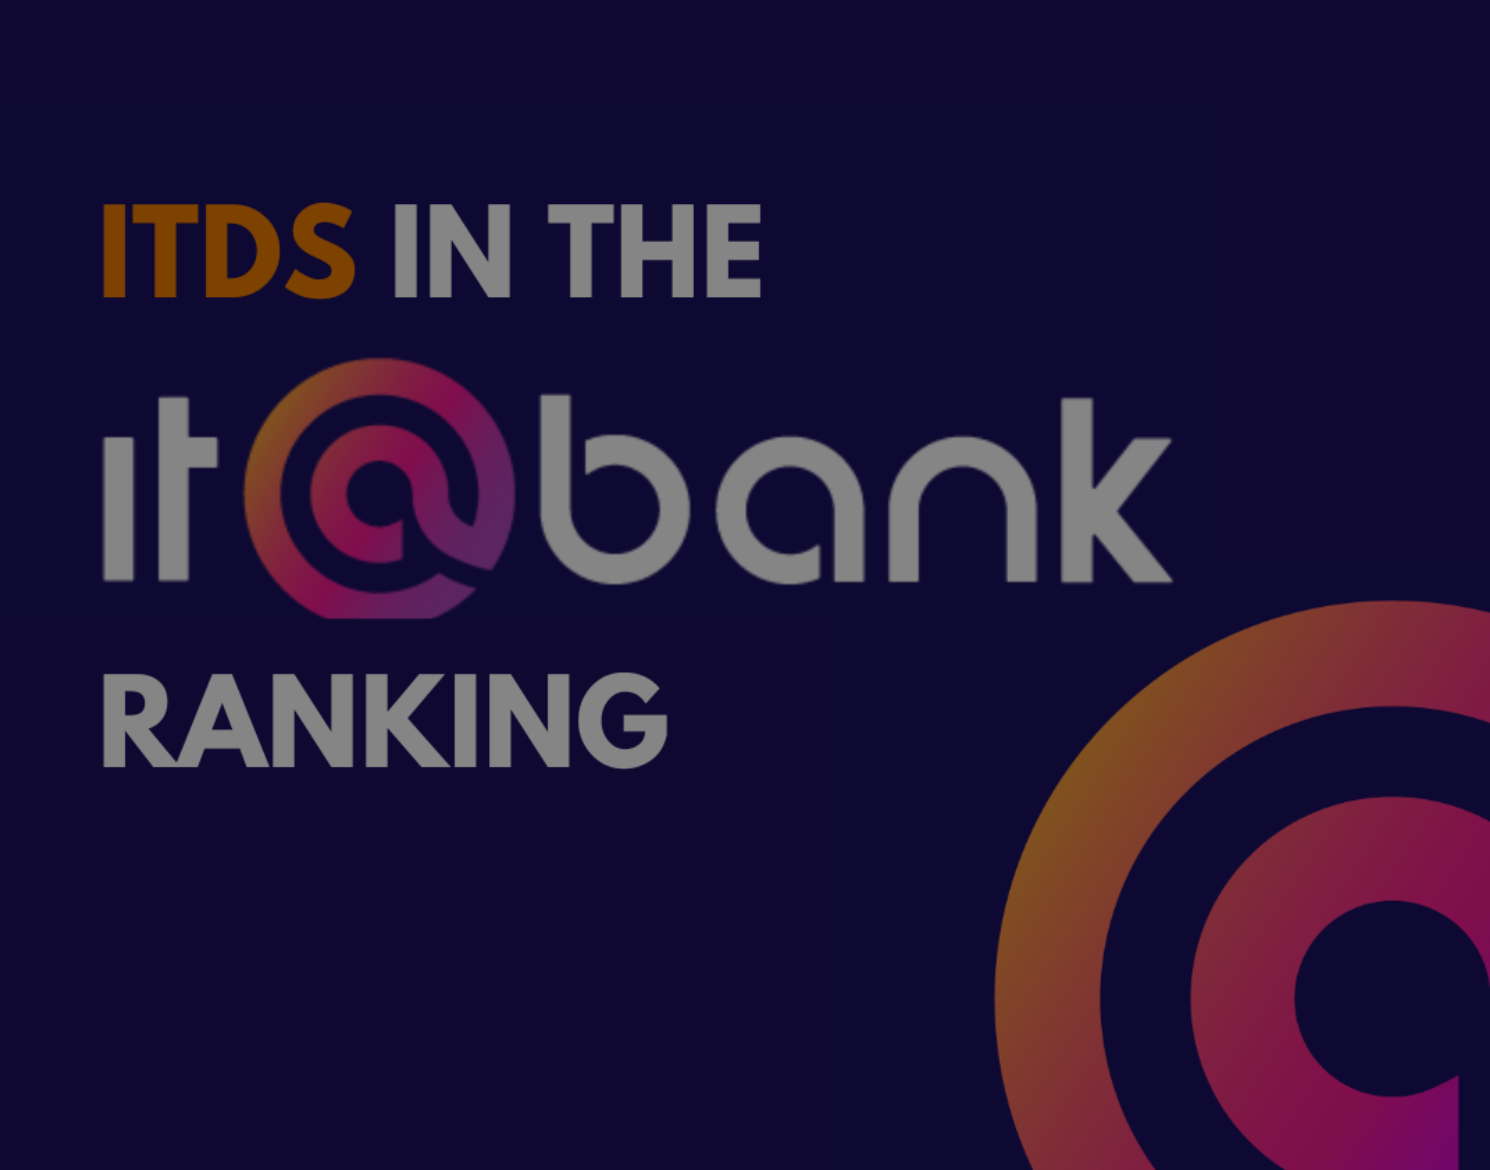 ITDS recognized in IT@BANK Ranking